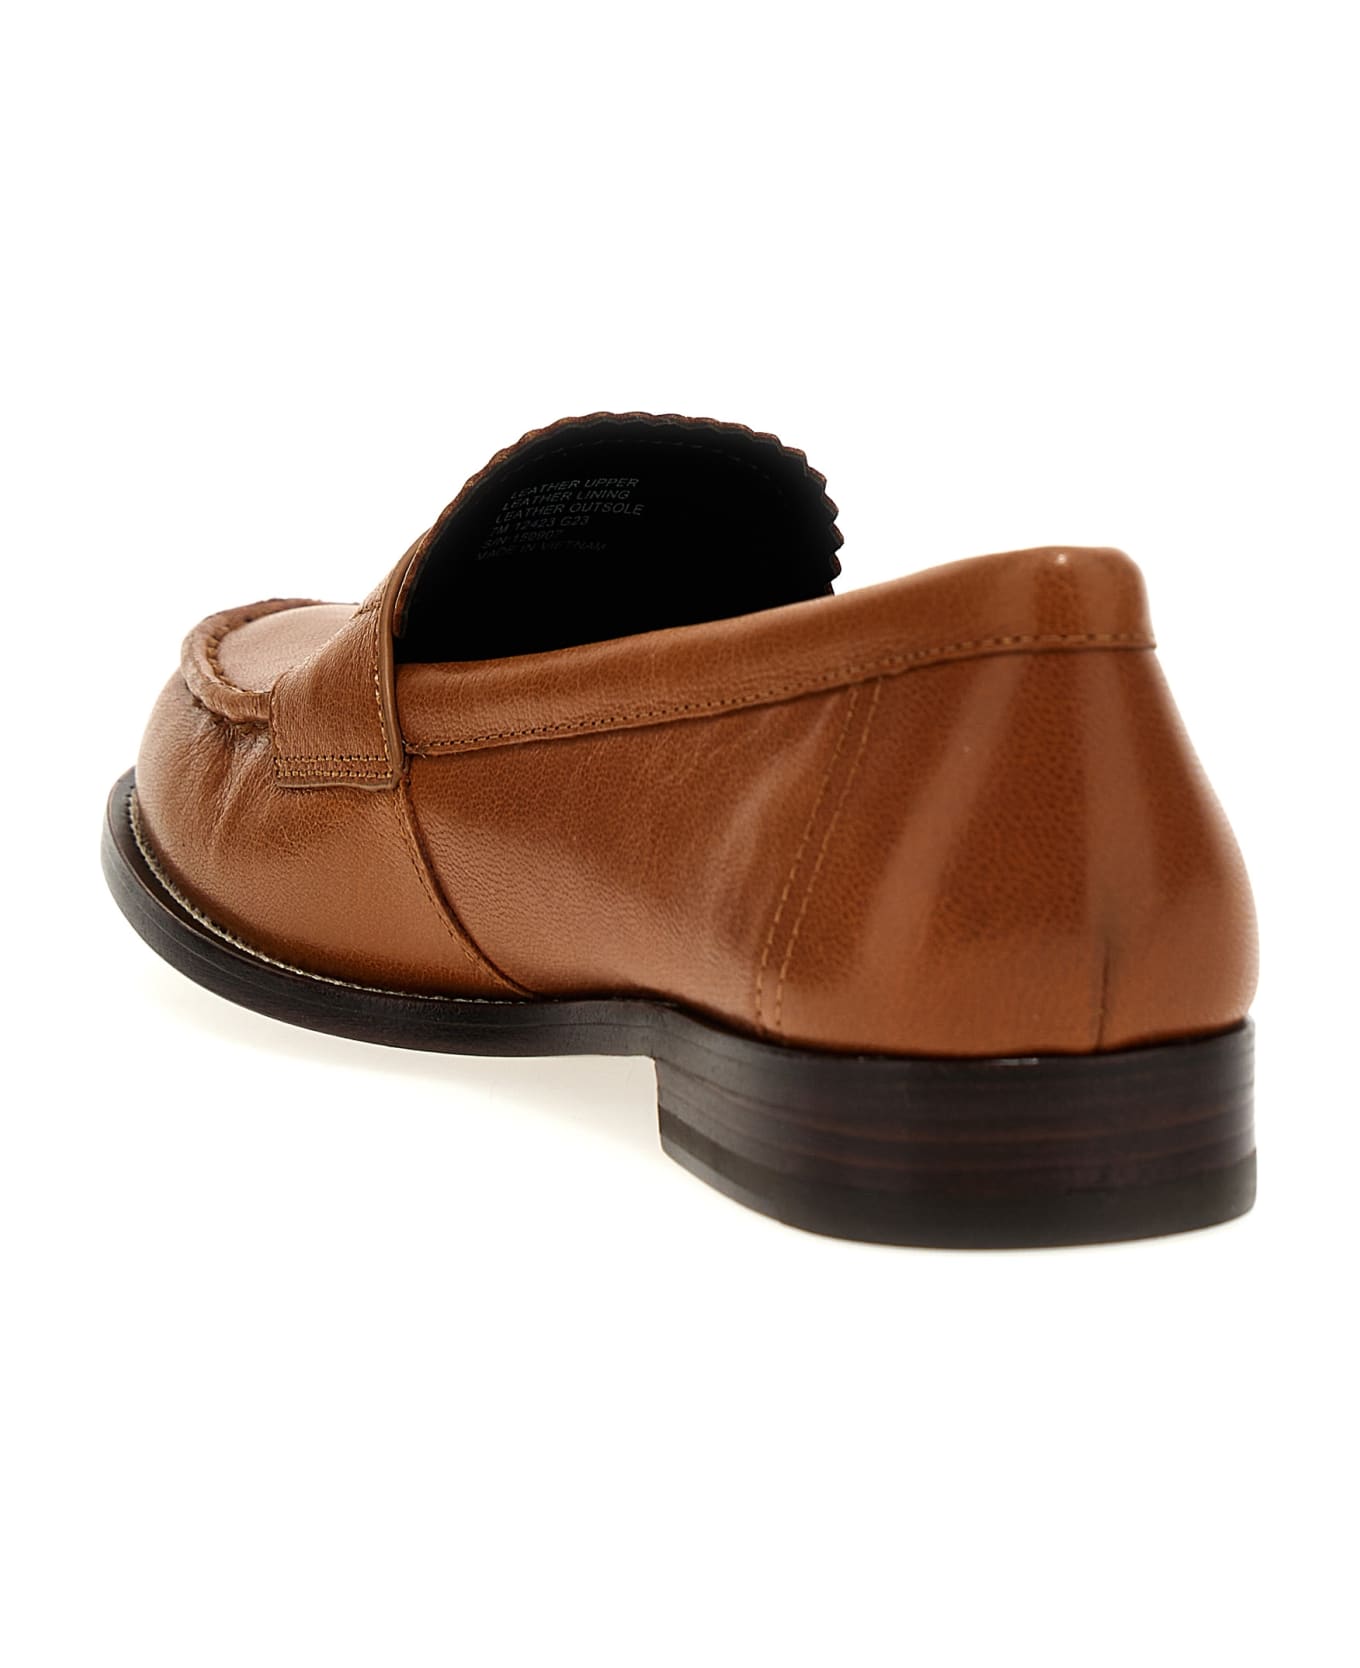 Tory Burch Camel Leather Loafers - Brown フラットシューズ